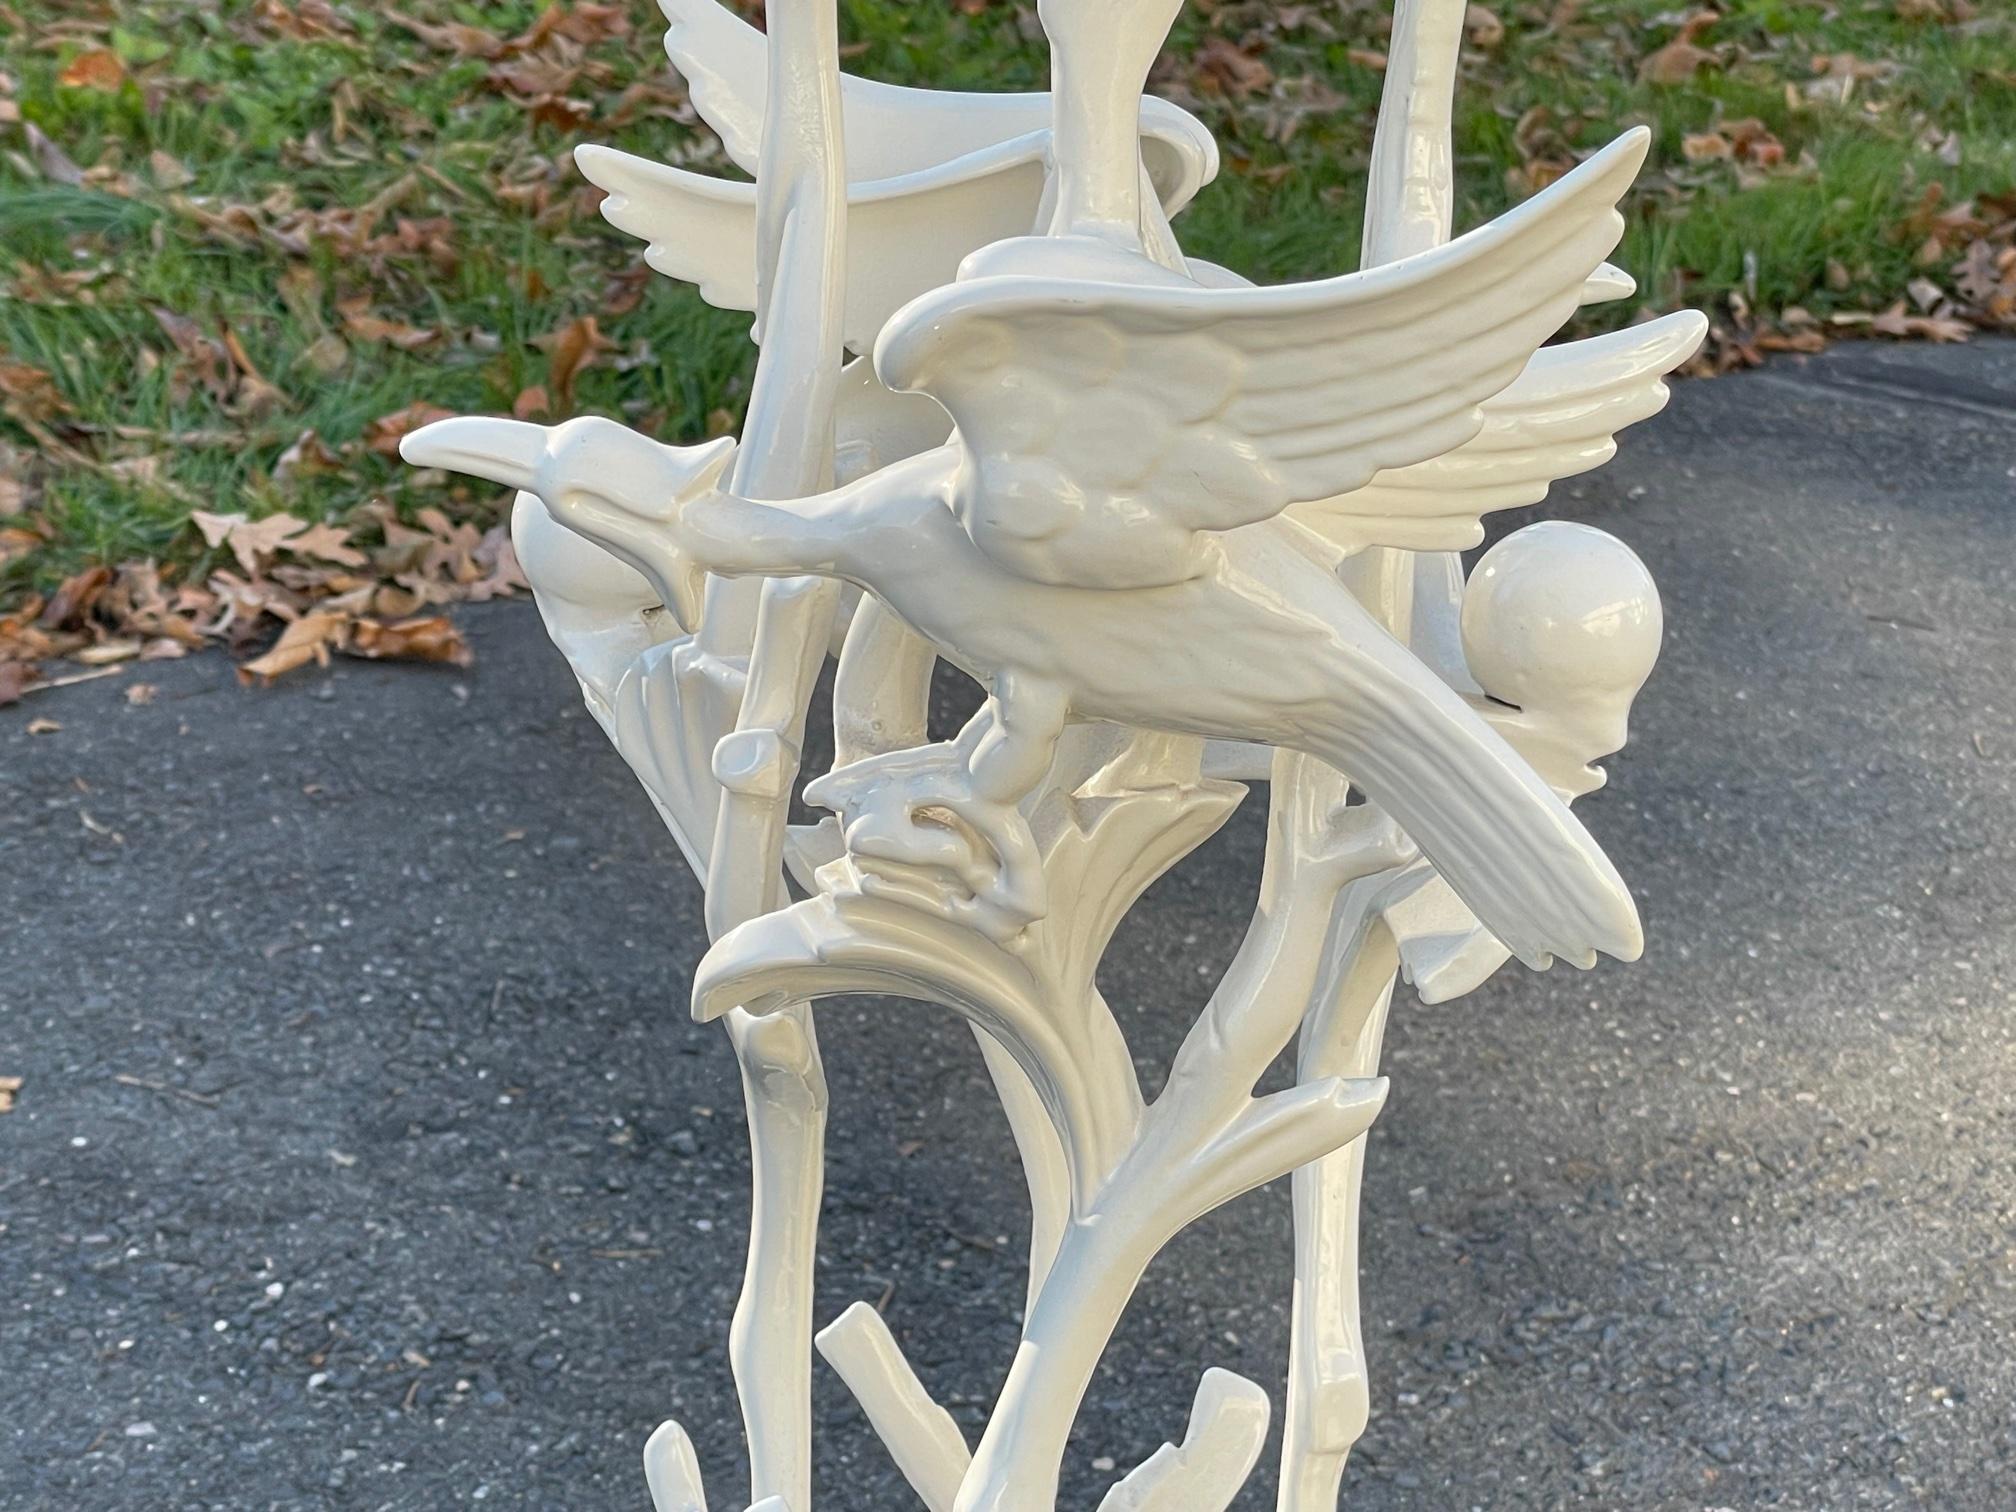 Late 20th Century Magnificent Sculptural White Enamel Cast Iron Plant Stand with Birds and Foliage